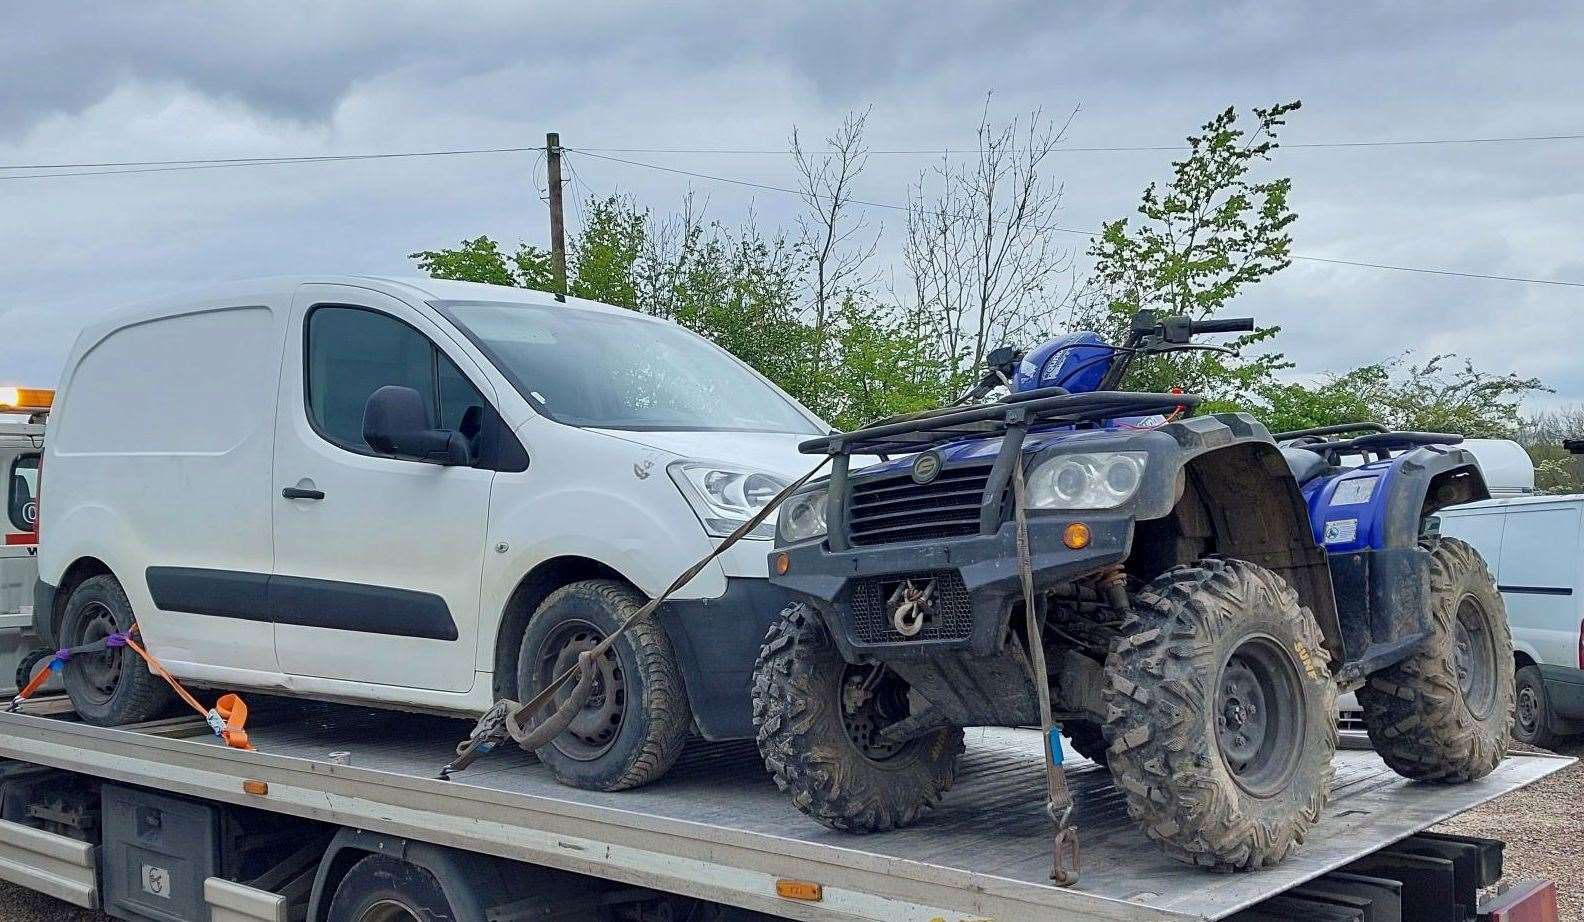 Items including a quad bike were seized. Picture: Kent Police